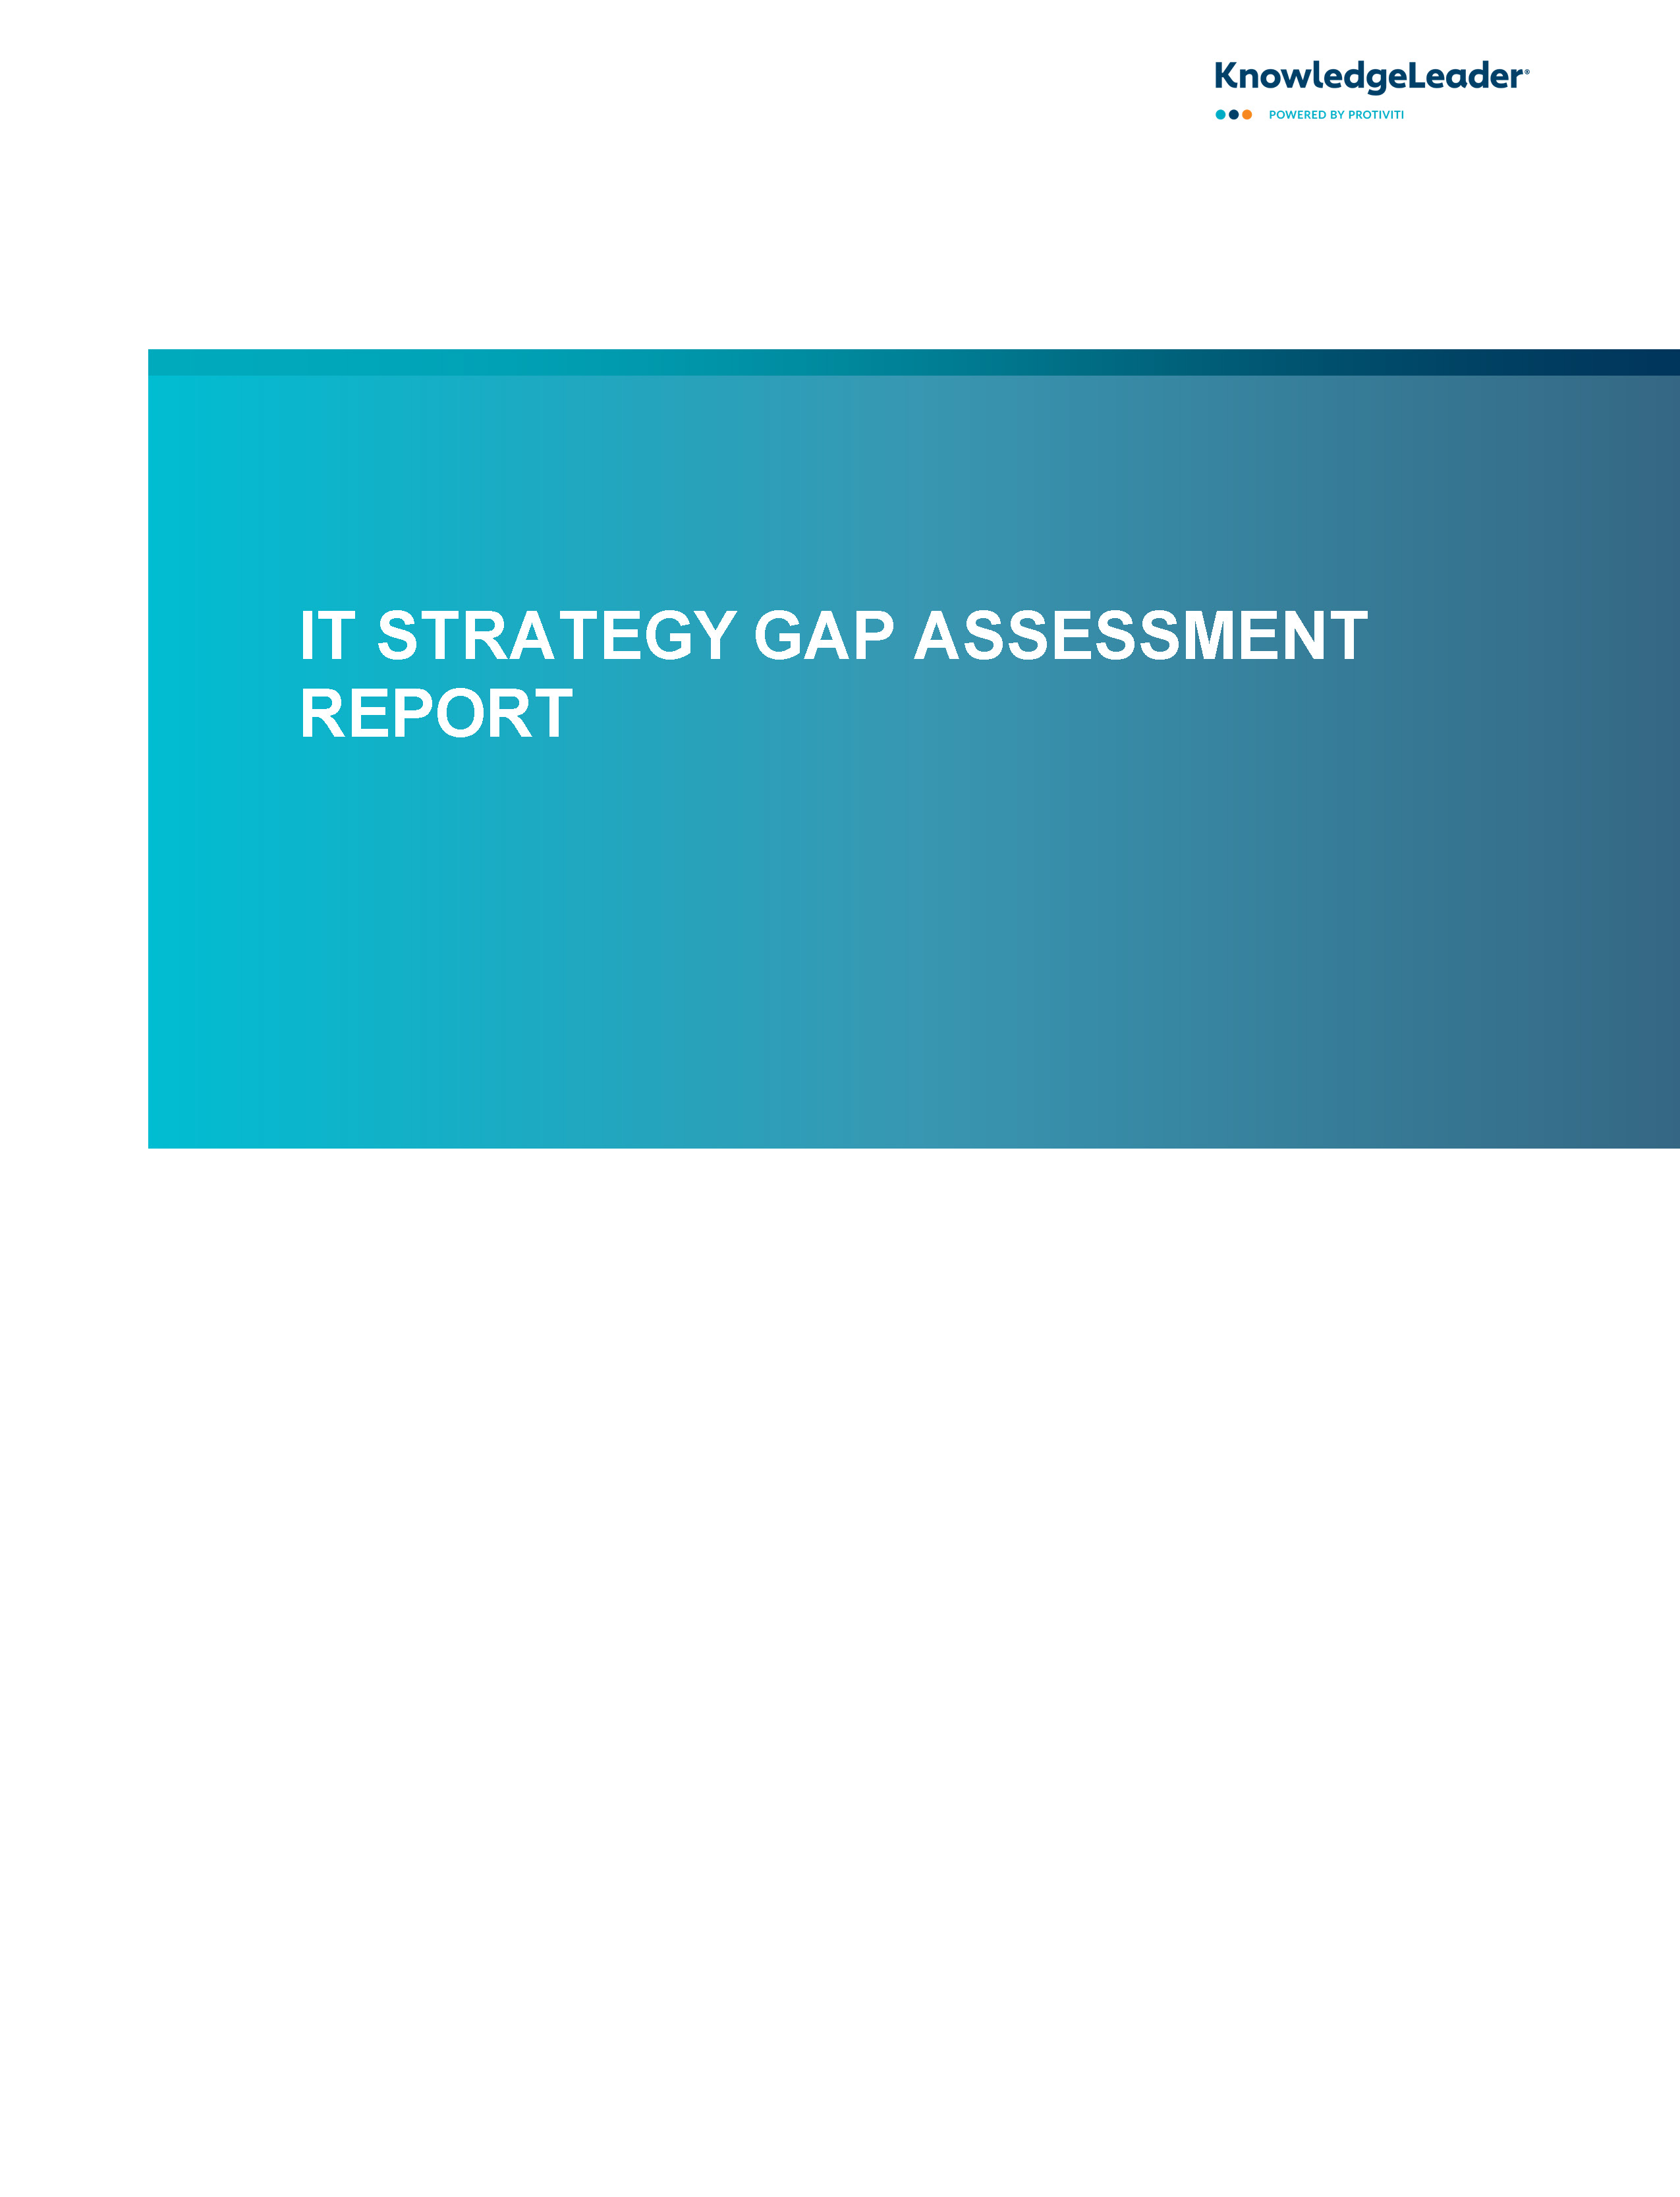 Screenshot of the first page of IT Strategy Gap Assessment Report